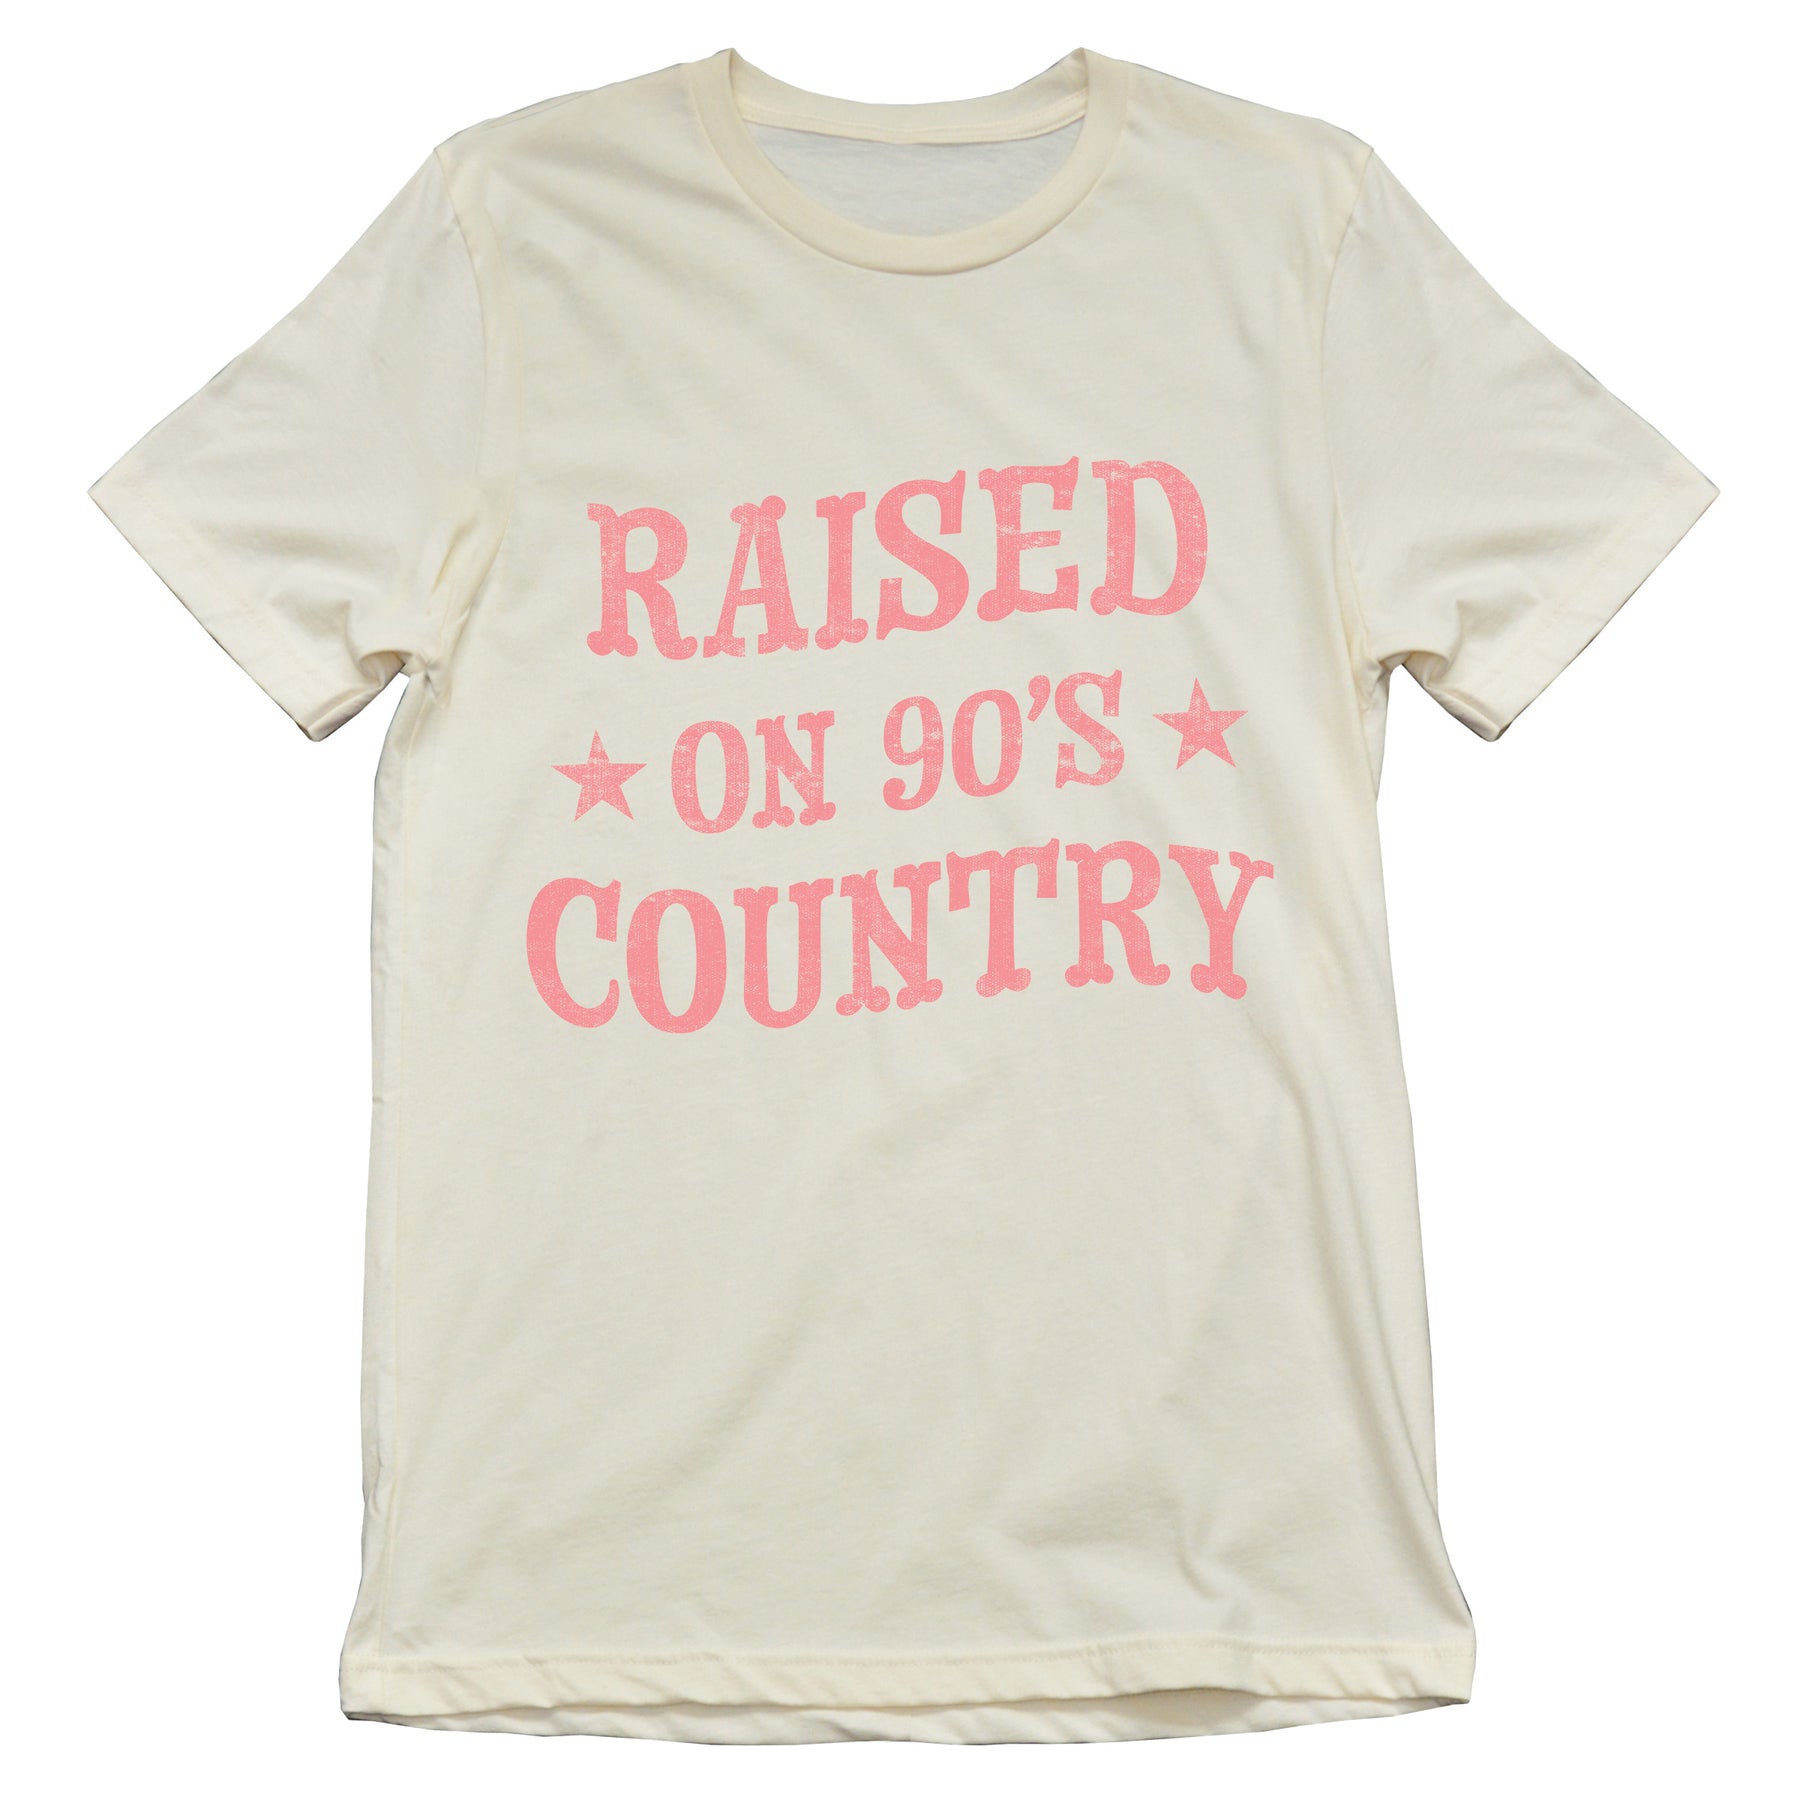 Raised on 90s Country Tee